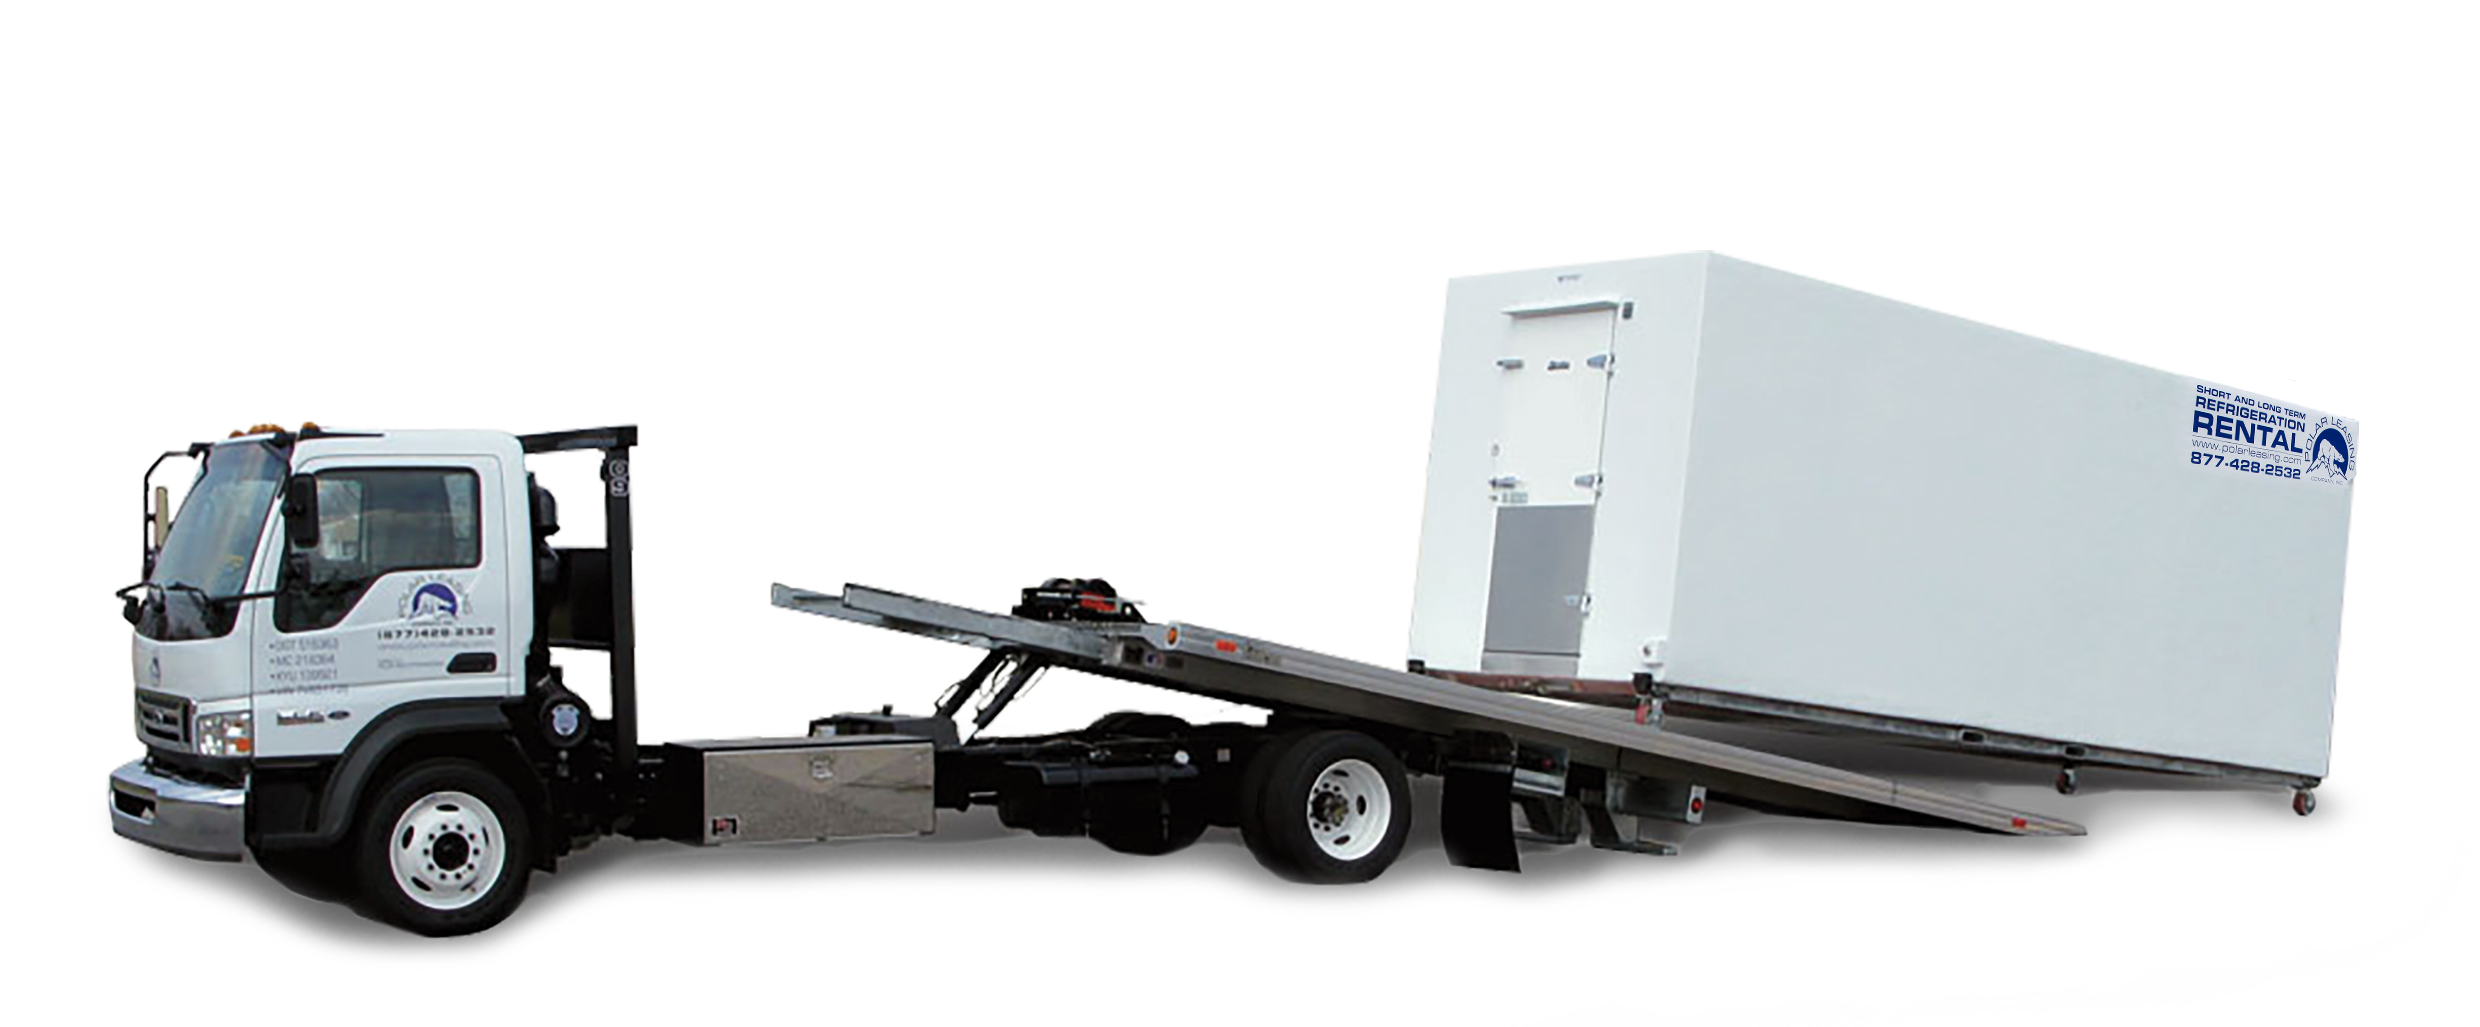 Ninety percent of the time, Polar Leasing delivers the rental unit exactly where the customer wants it.